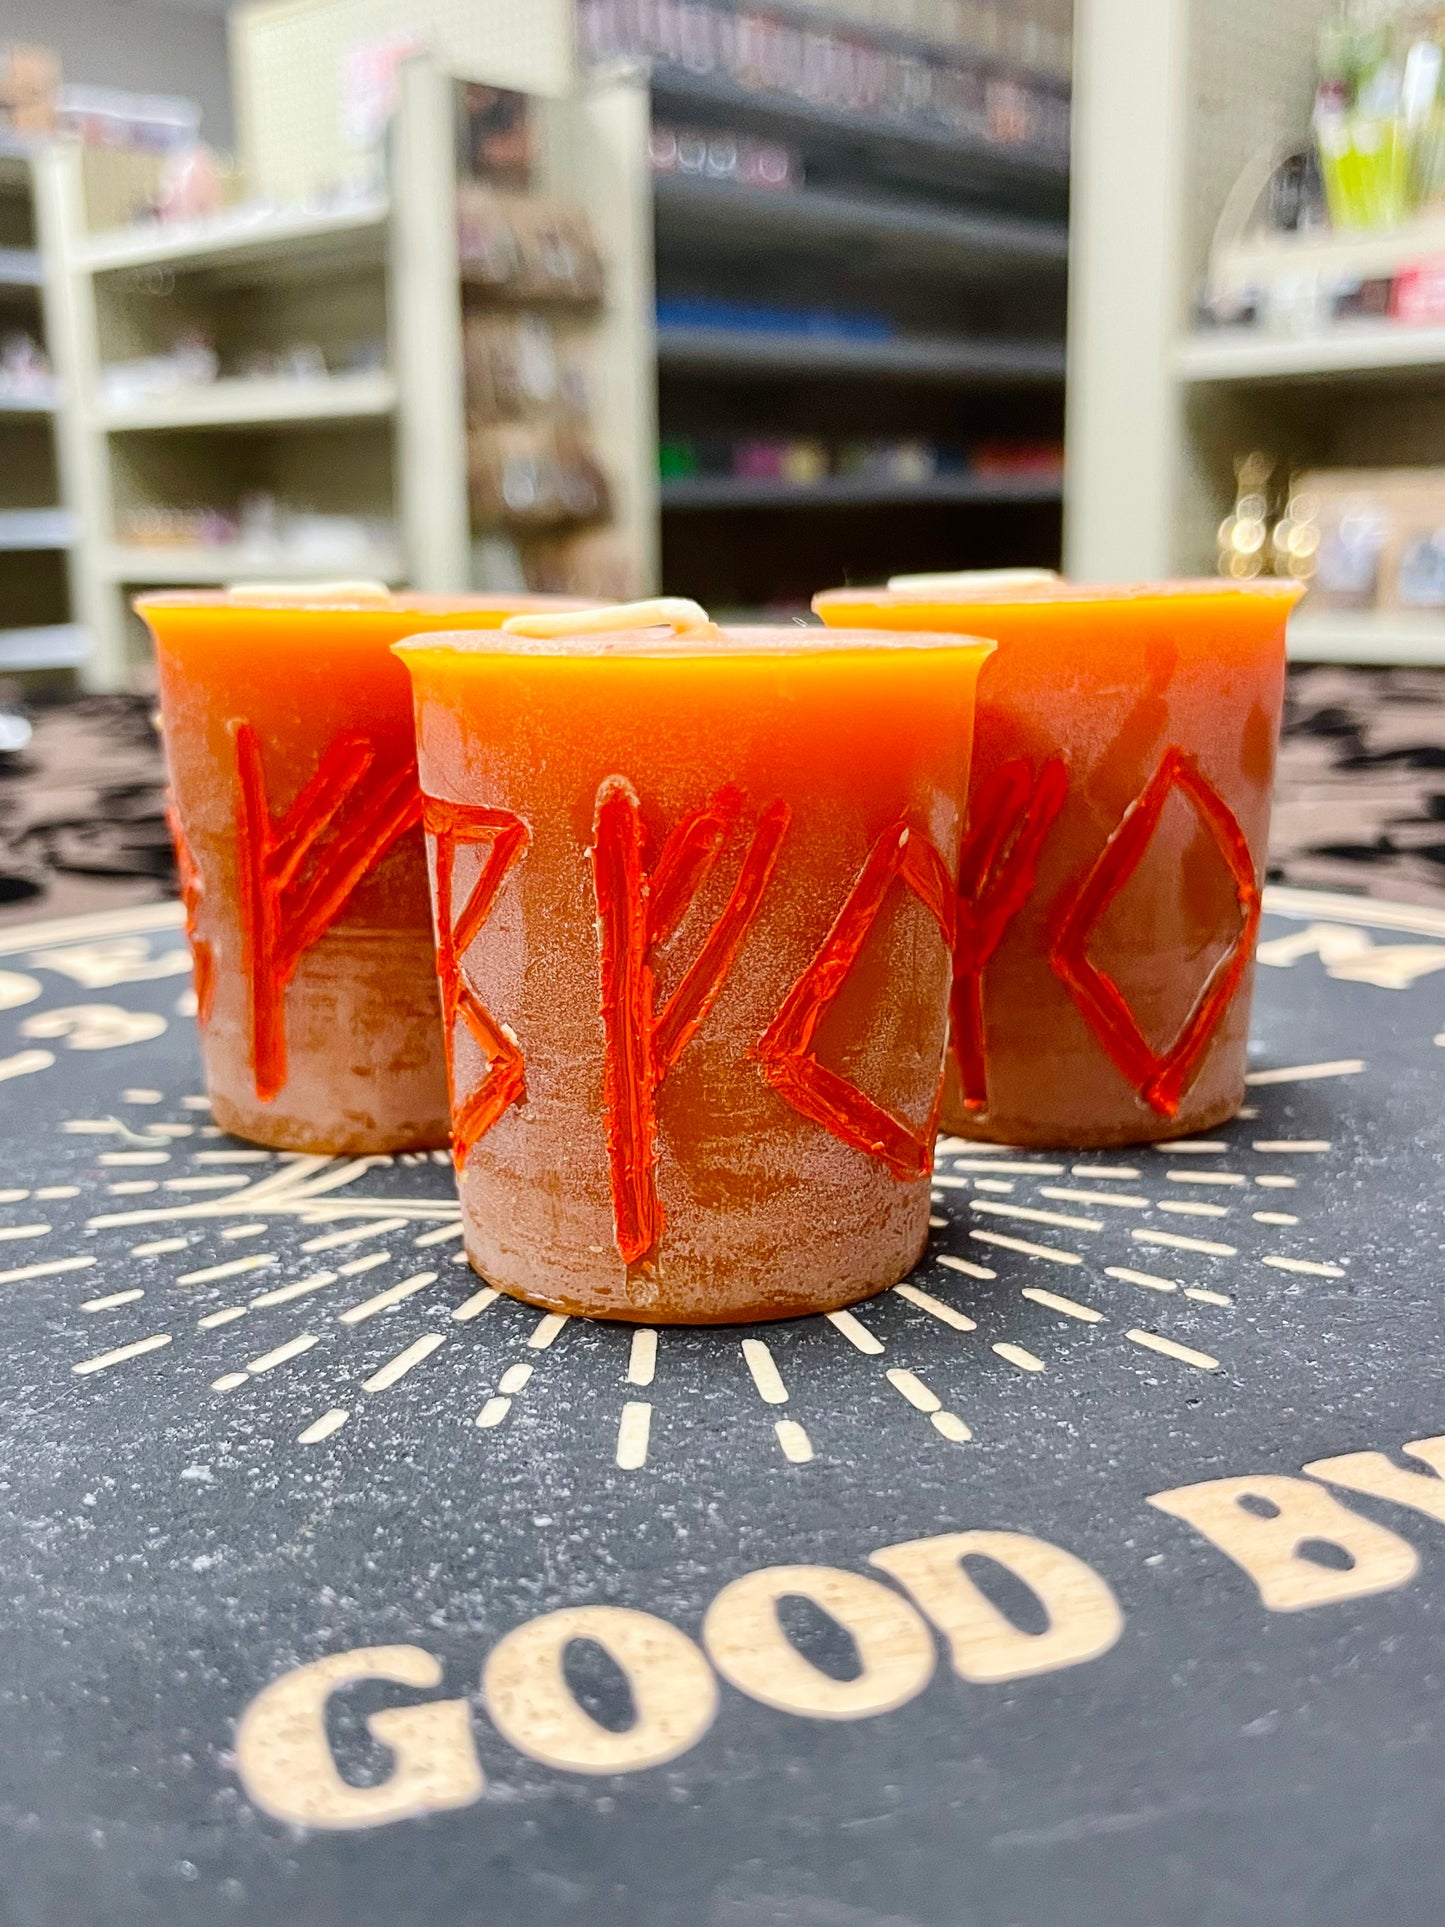 Fertility Rune Spell Candle Votive, Orange Beeswax Candle, Orange Scent